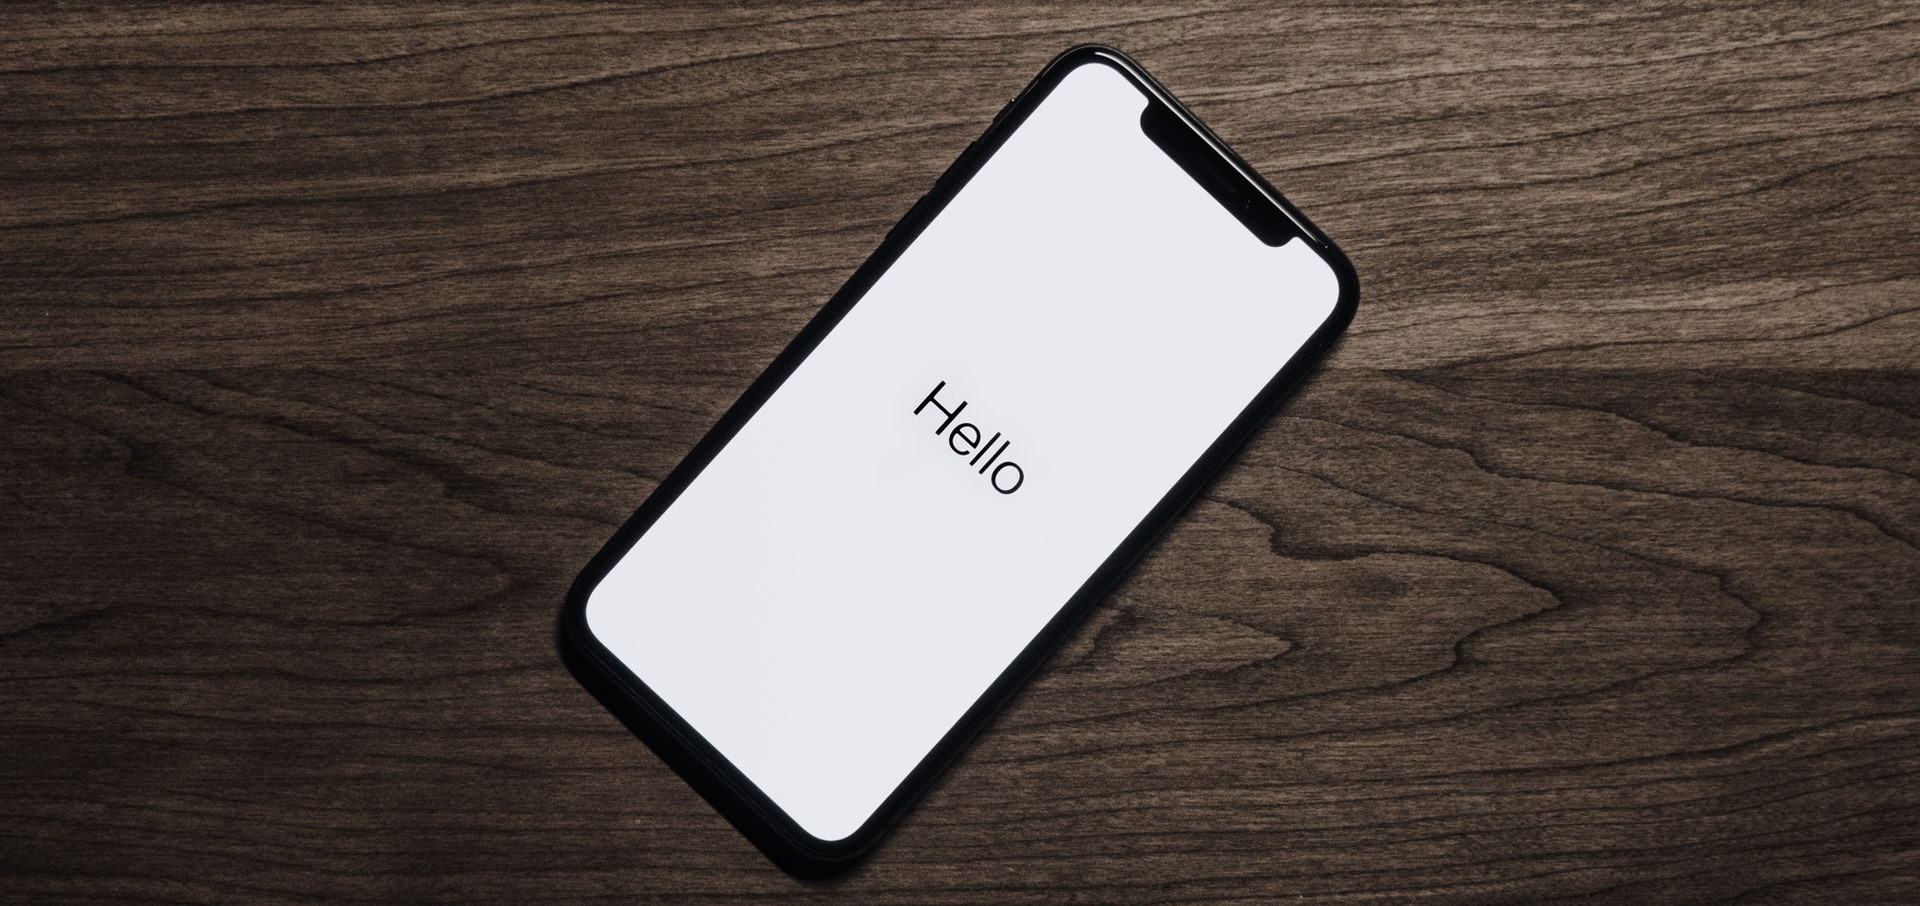 iPhone on table showing Hello